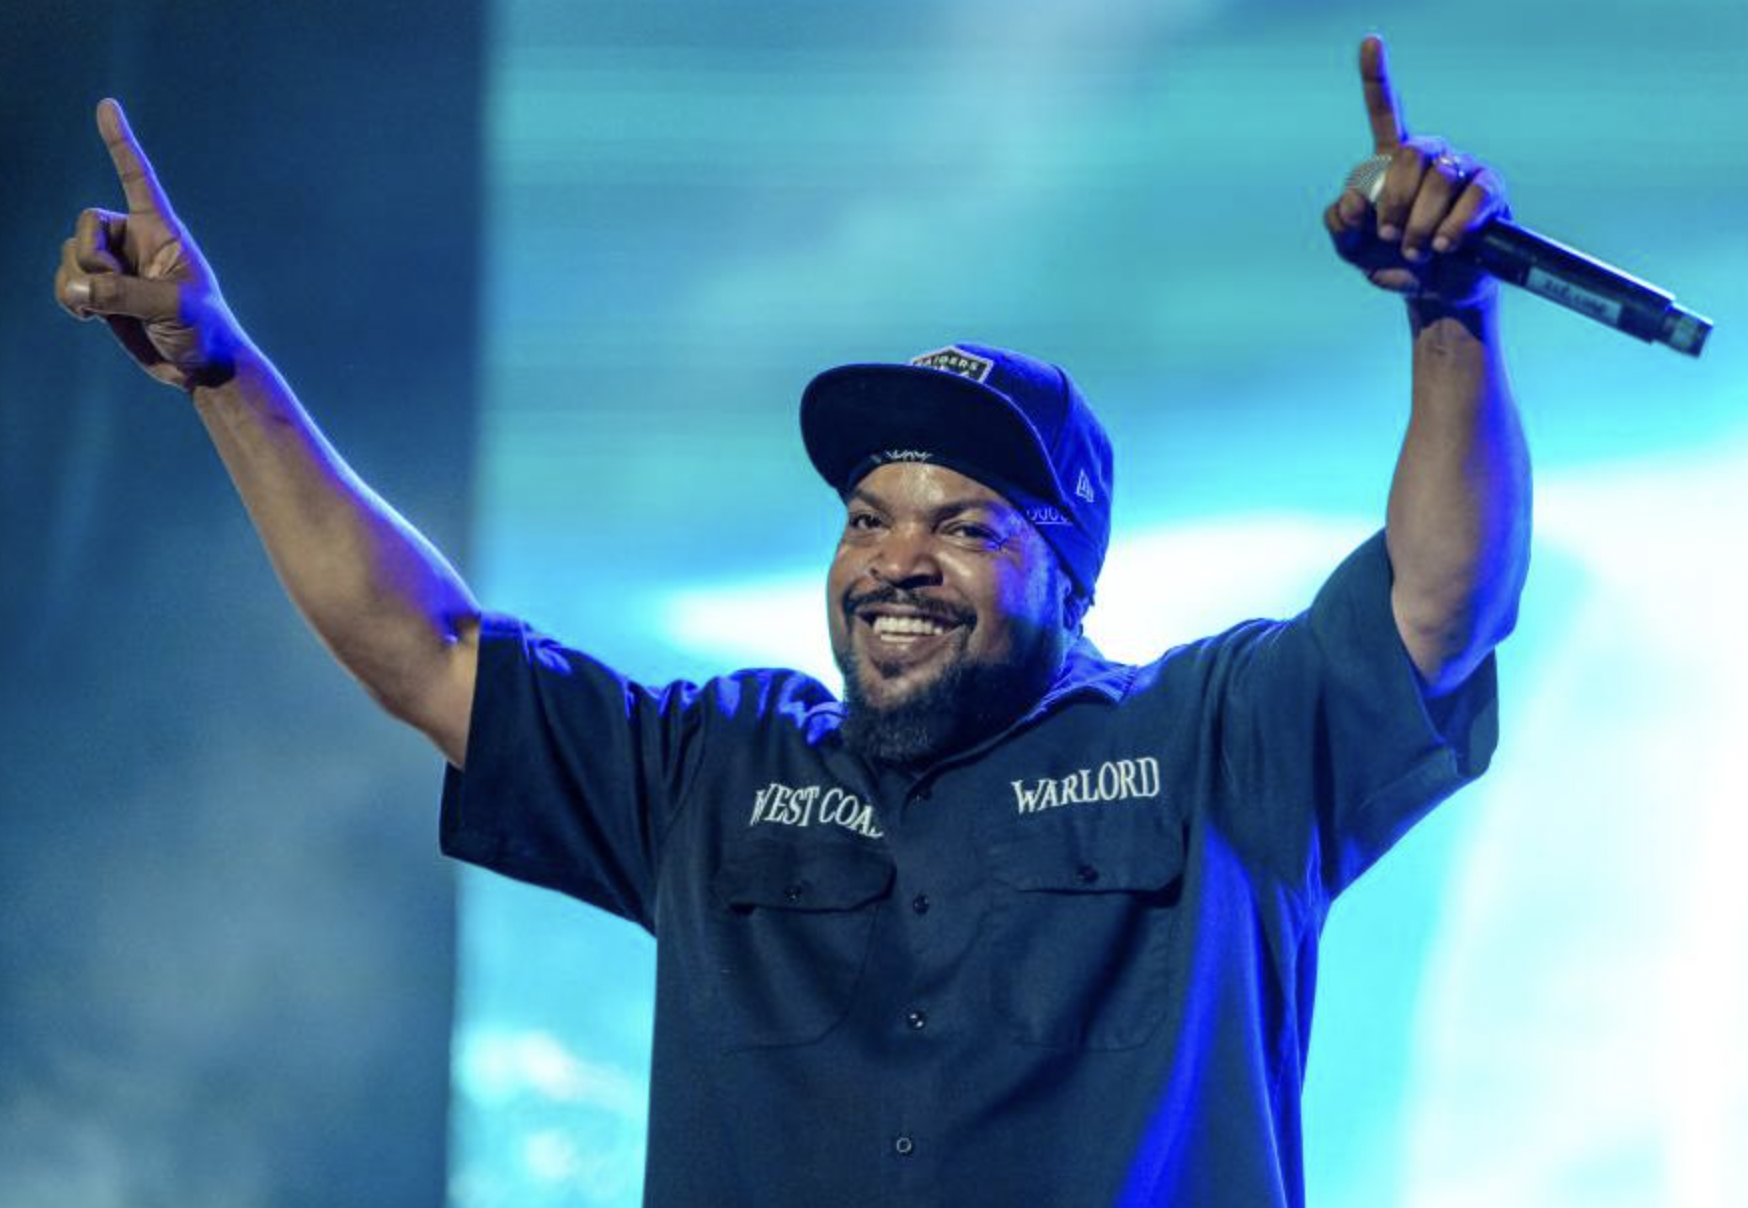 ice cube - West Coa Warlord